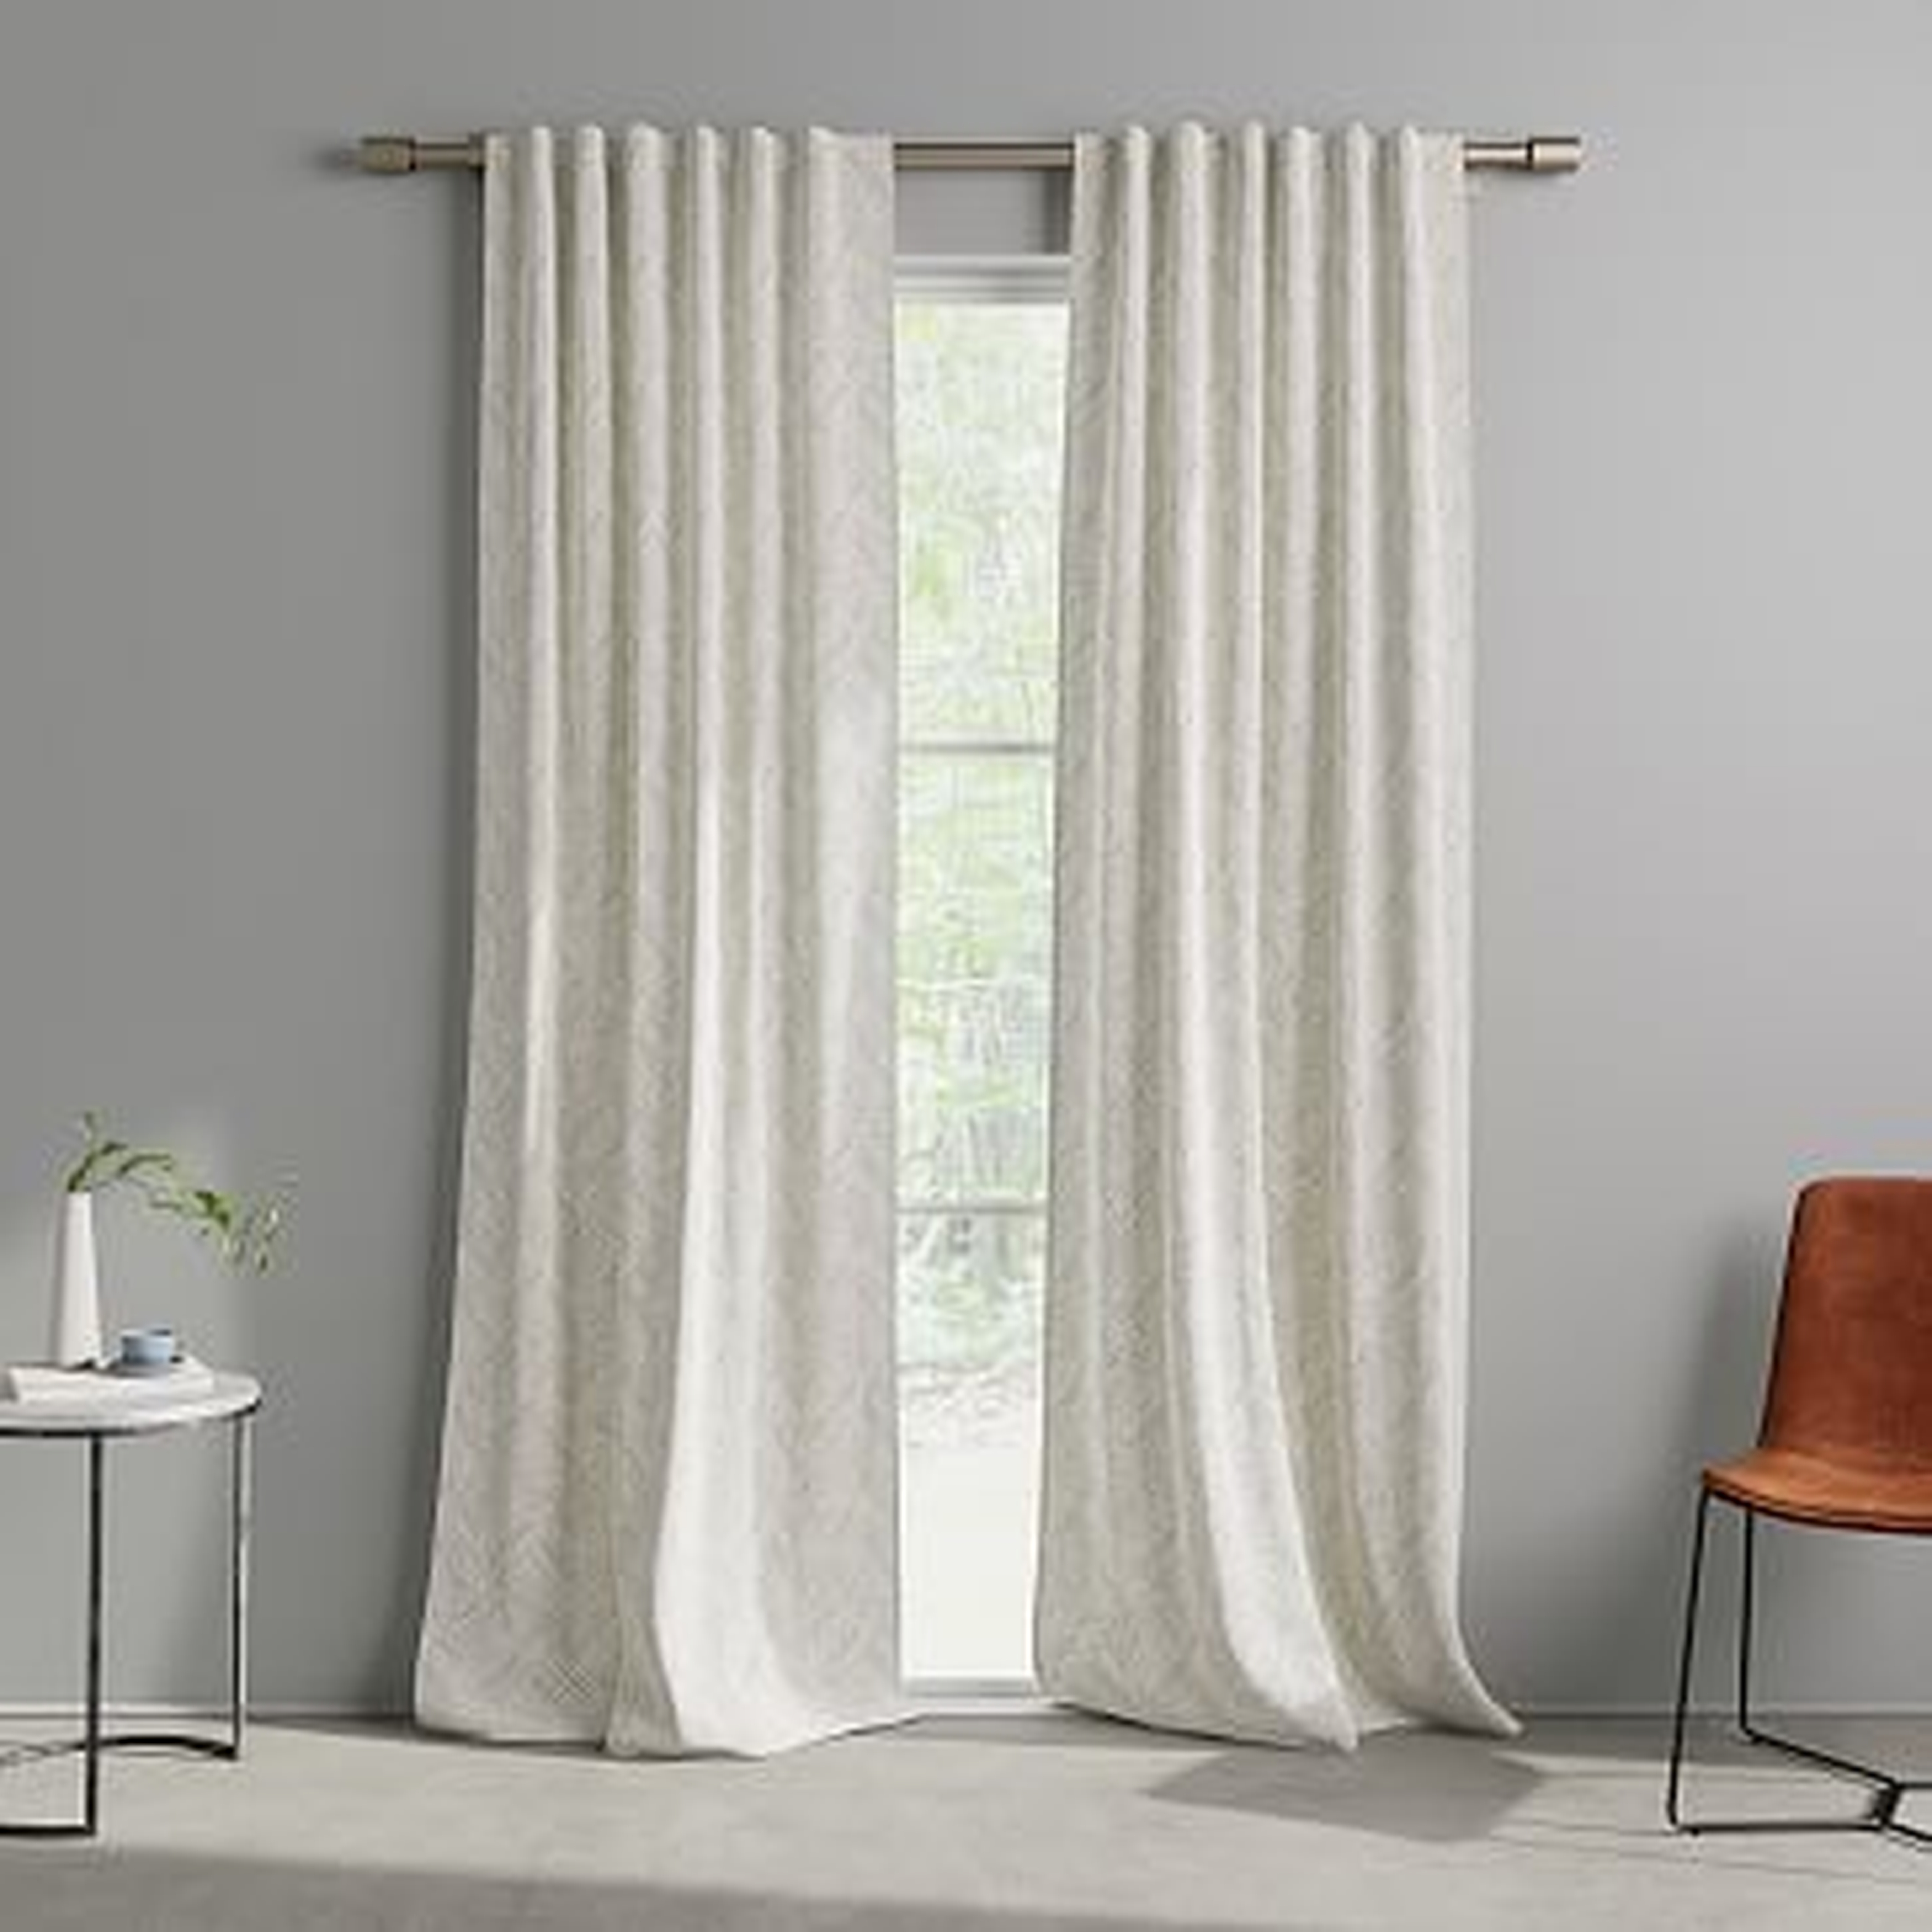 Cotton Canvas Fragmented Lines Curtains (Set of 2) - Iron Gate - West Elm